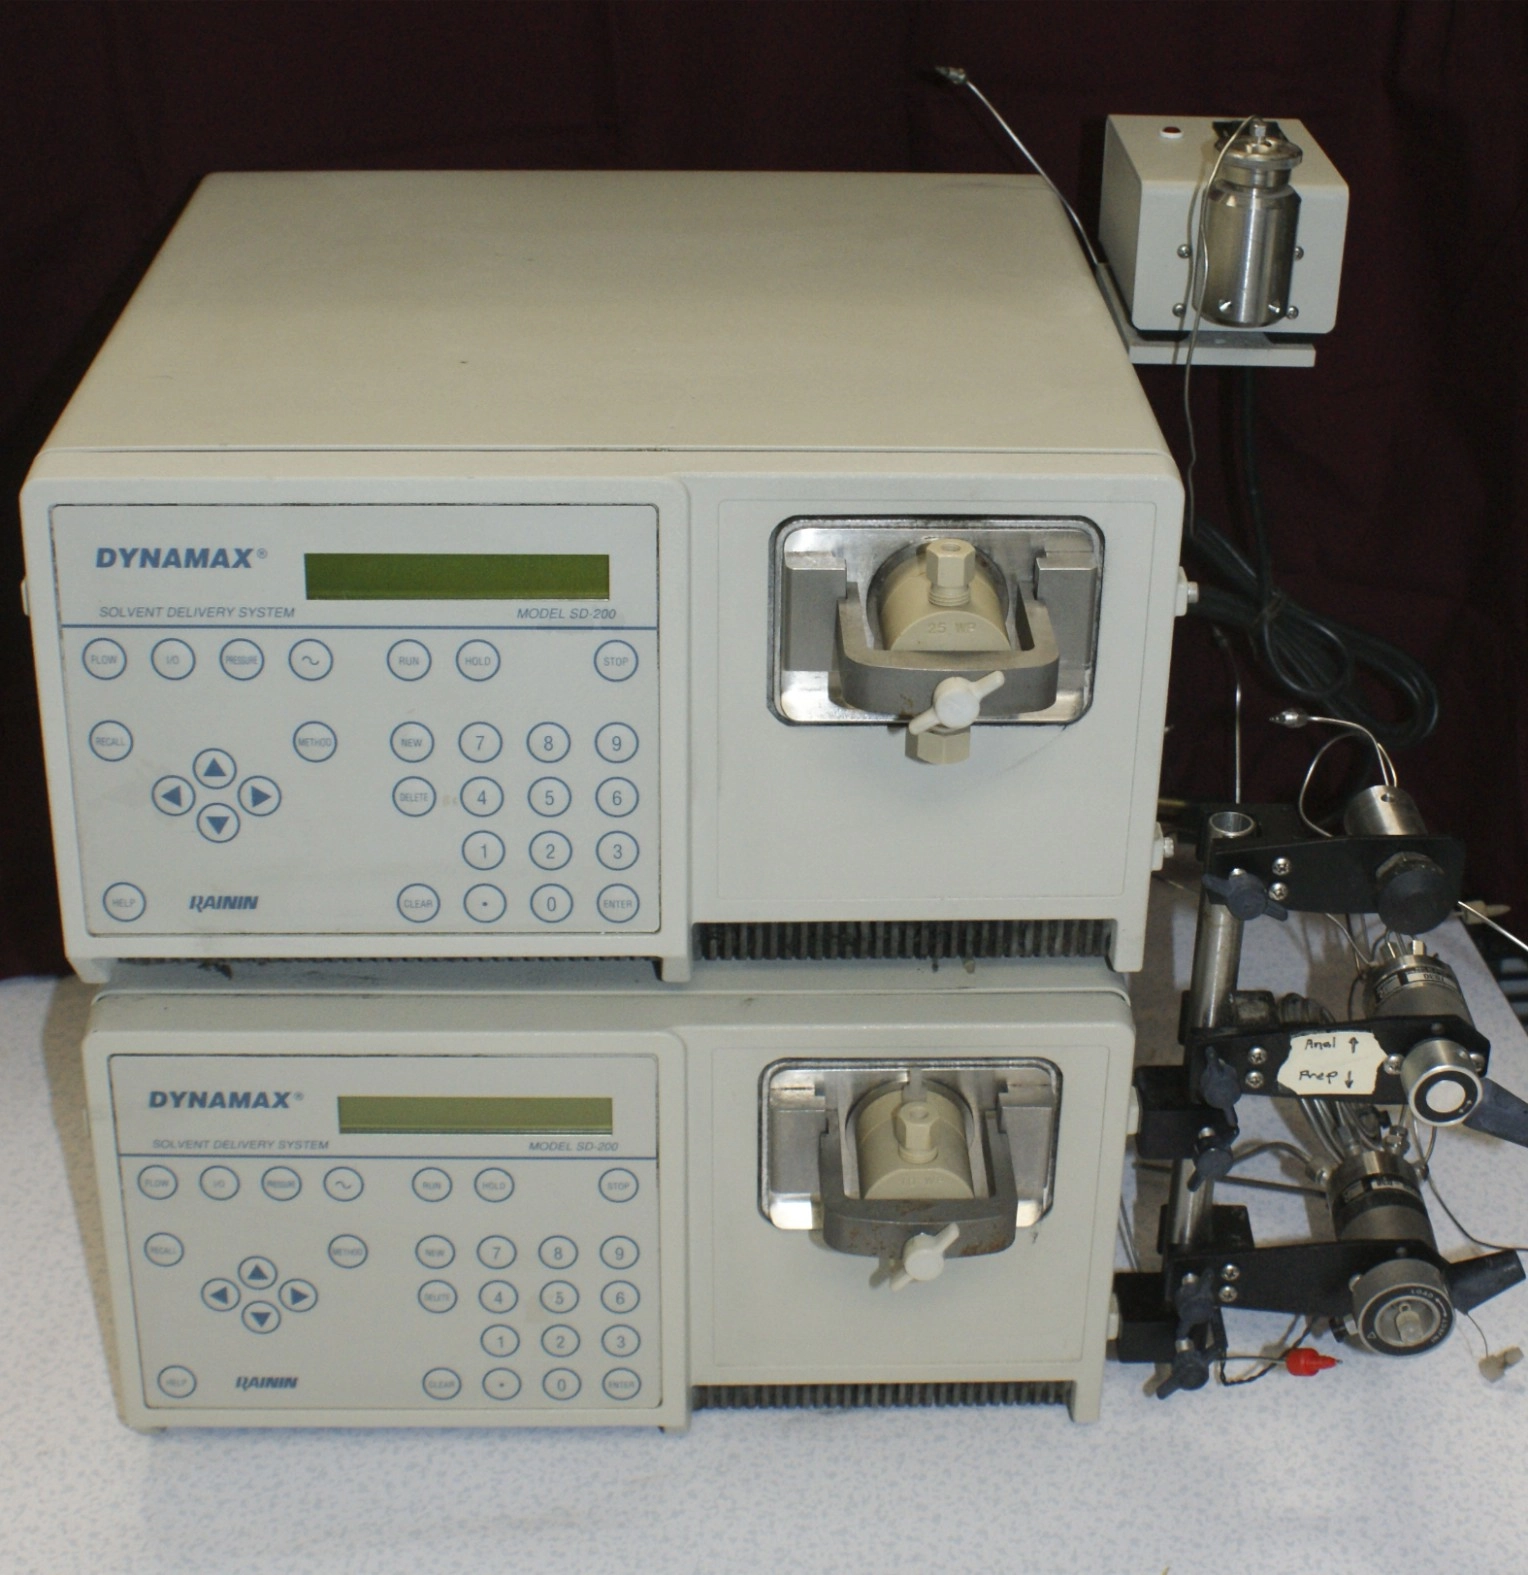 Rainin Dynamax SD-200 Solvent Delivery System HPLC Pump Rainin Solvent Delivery System Dynamax